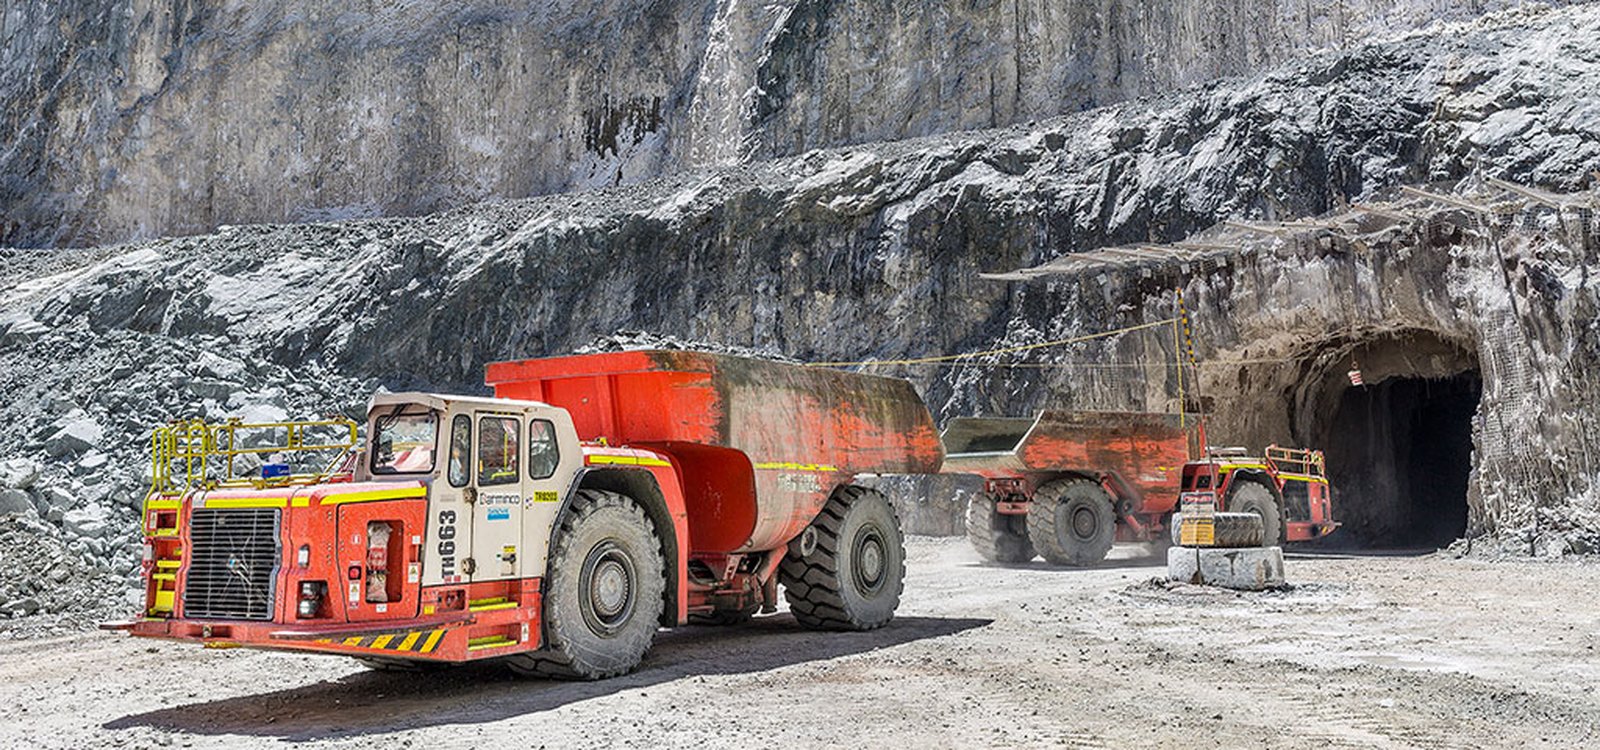 Sandvik TH663 trucks help Barminco reach productivity targets, currently running in the order of 220,000 tonnes of ore per month. 